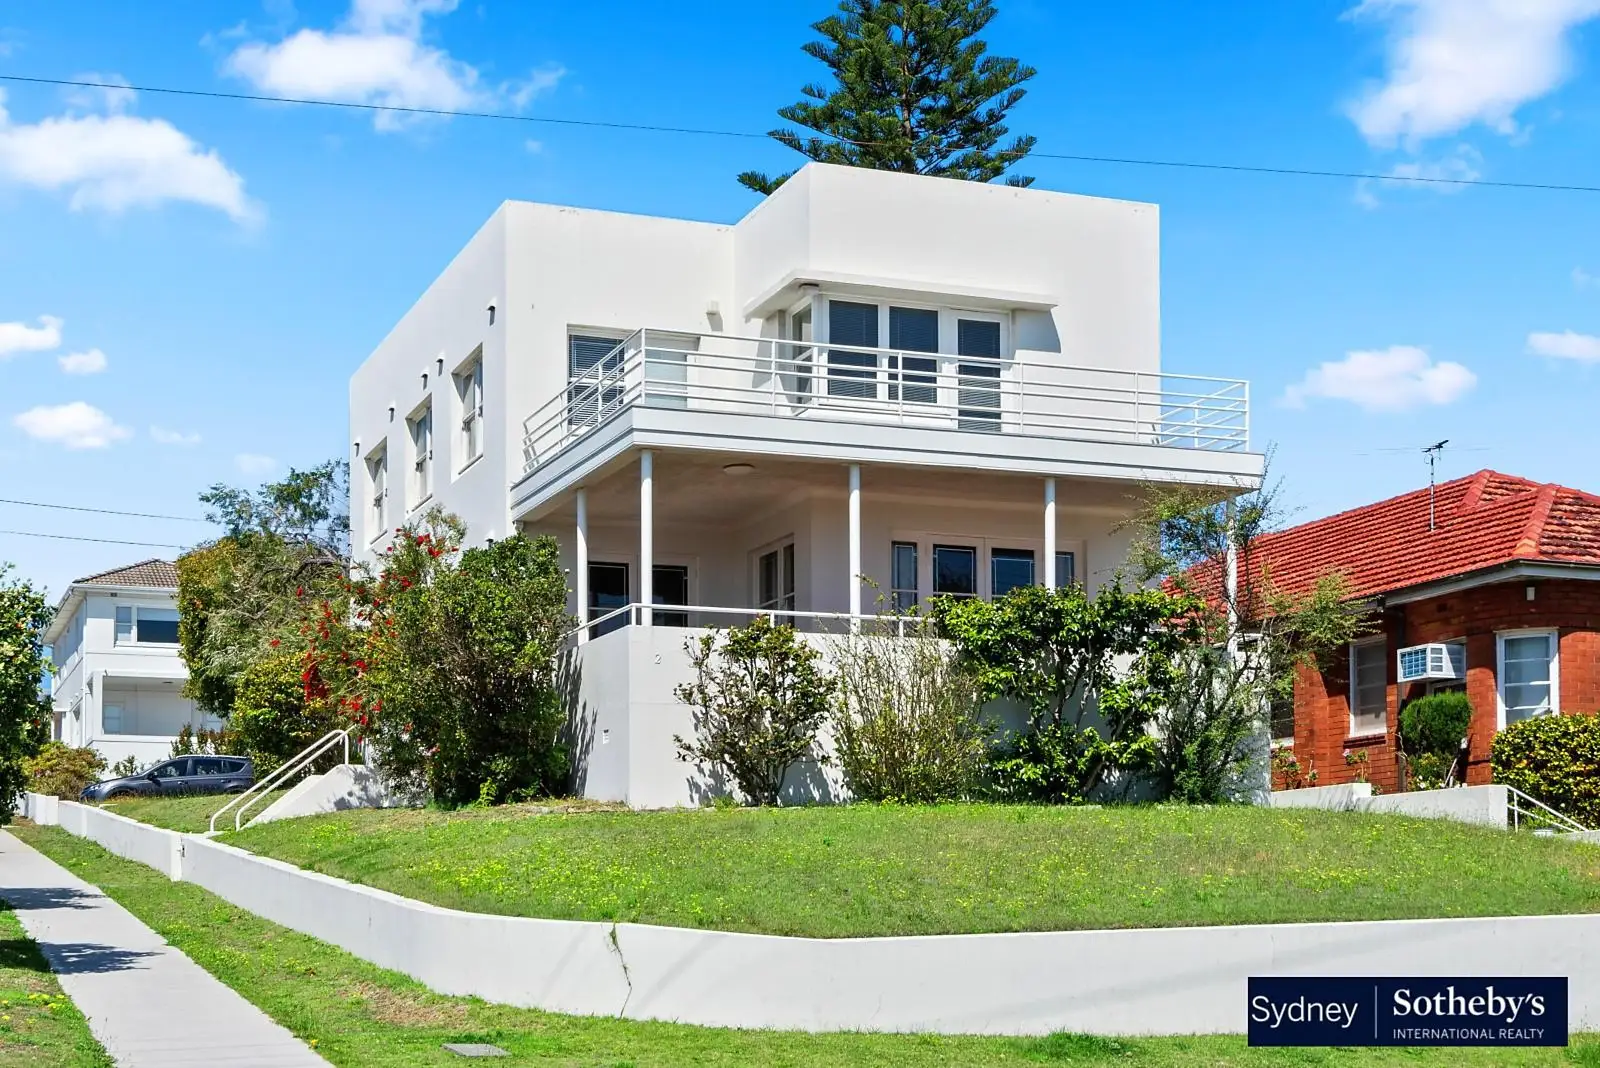 2 Wallangra Road, Dover Heights Leased by Sydney Sotheby's International Realty - image 1